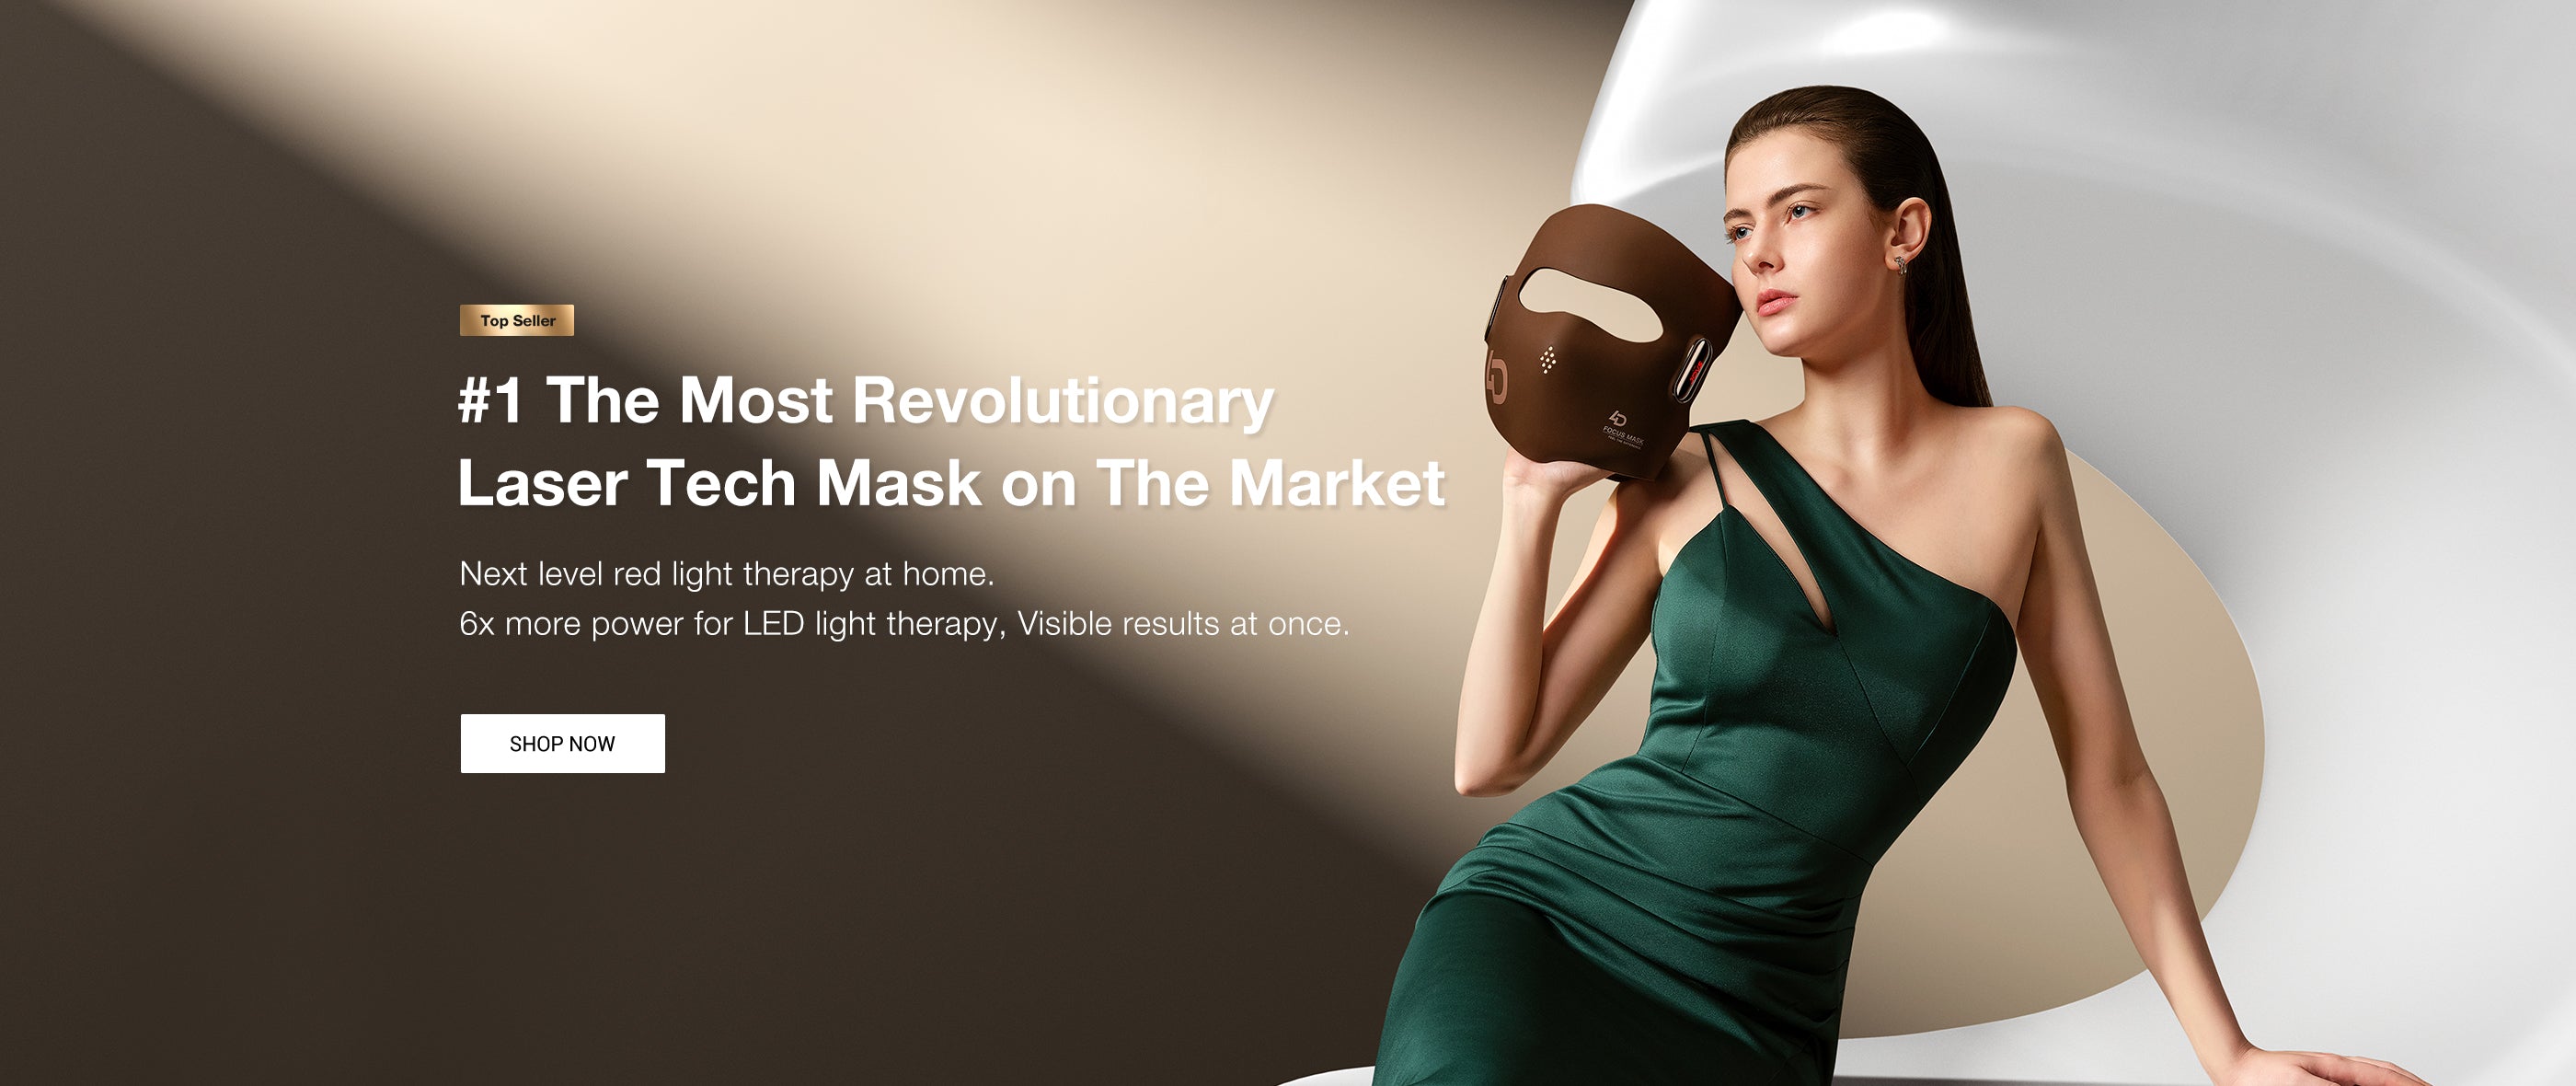 Explore the next-level skincare with JOVS 4D Laser Tech Mask, effective red light therapy at home.